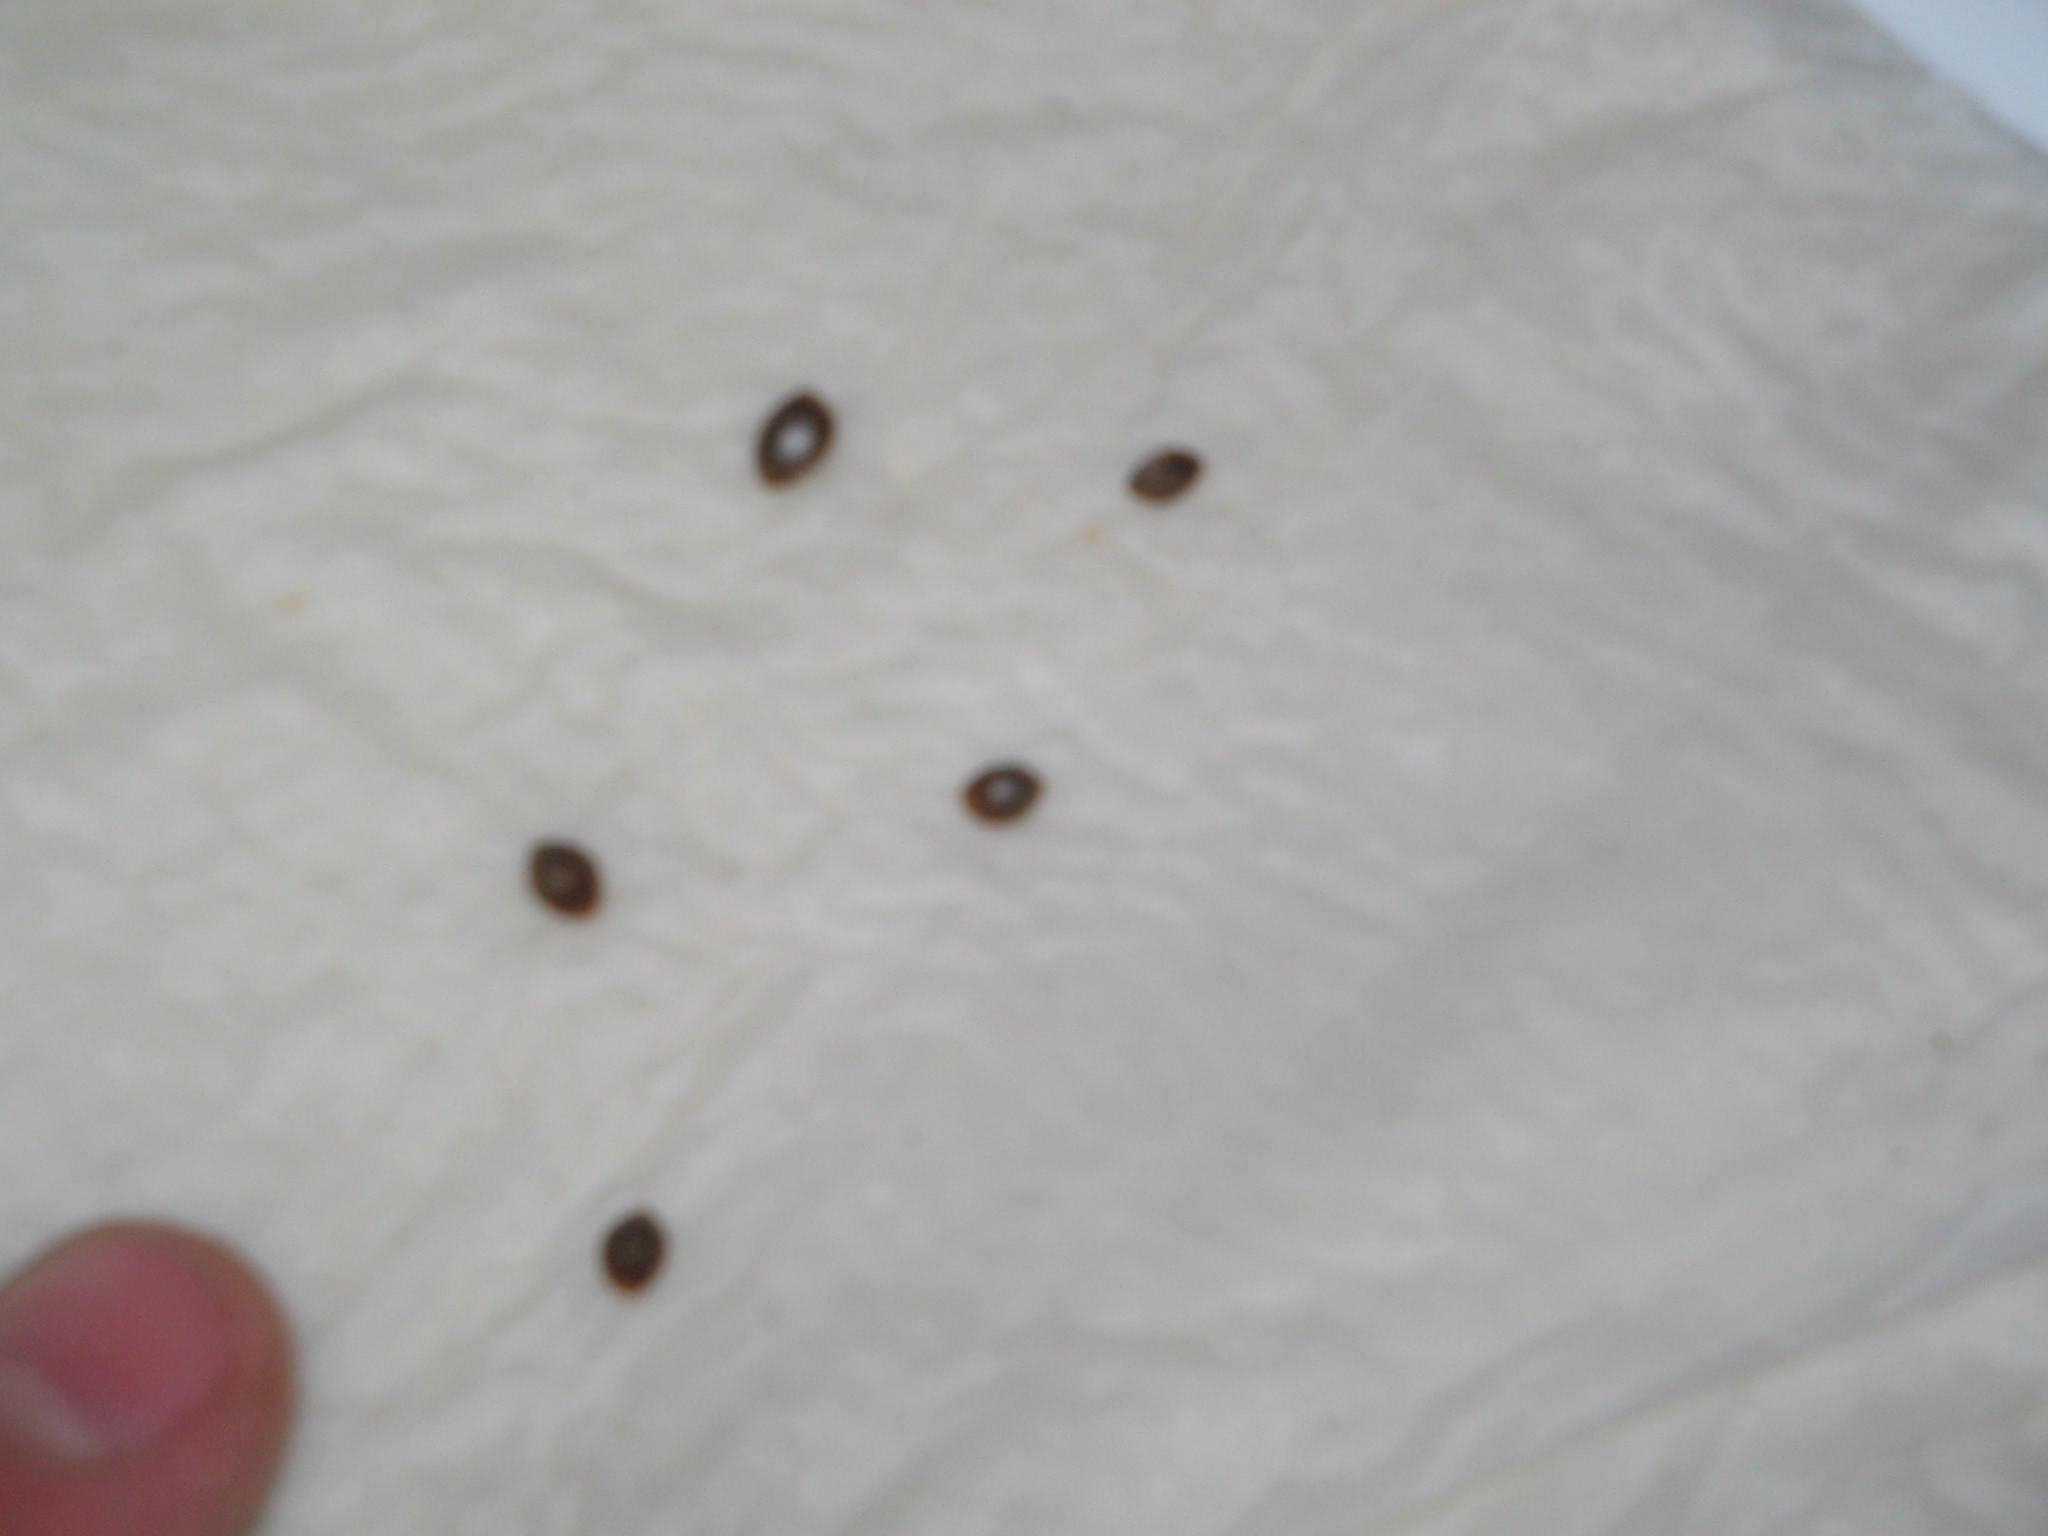 These blueberry  seeds are some of the smallest iv ever seen. But for now I'm going to use clones